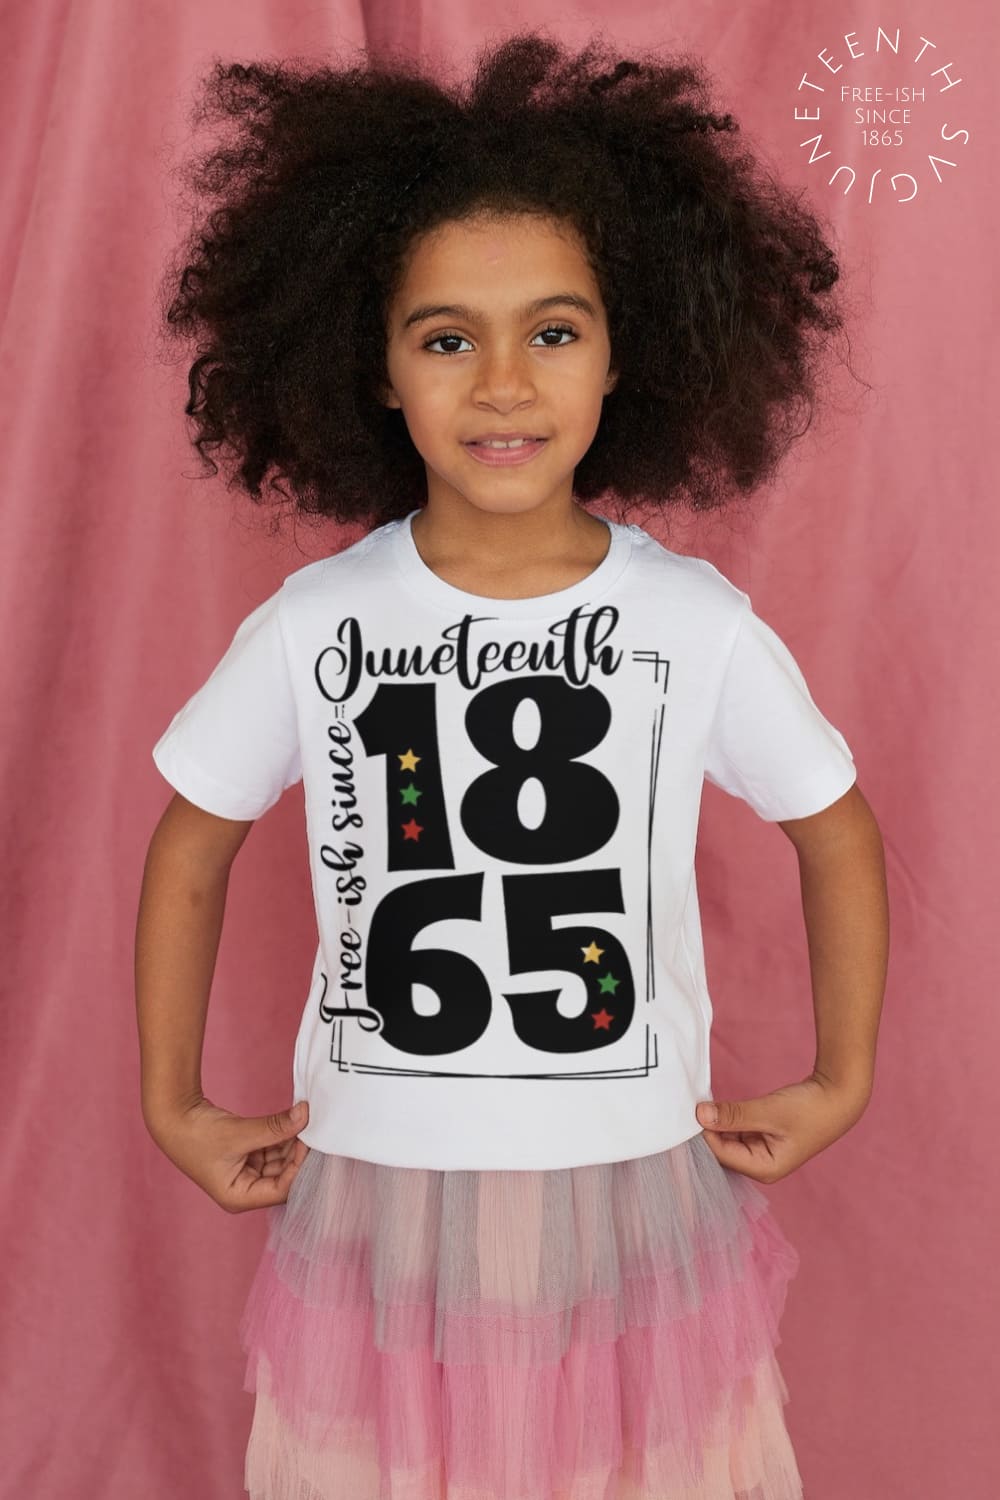 Afro girl in a white T-shirt with a colorful print inscription "1865".